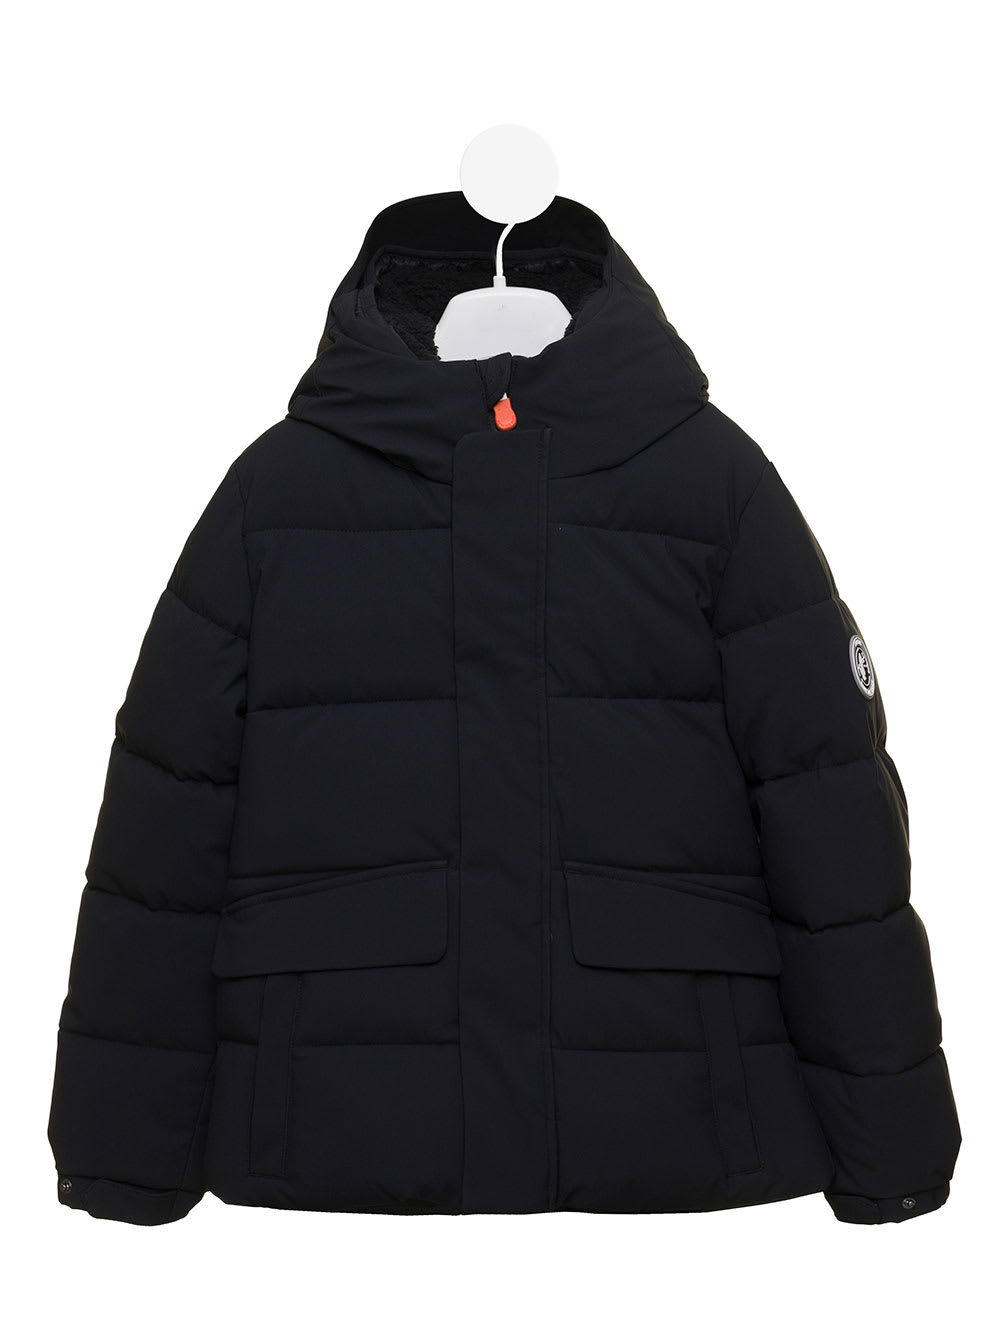 Save The Duck Kids Boys Black Hooded Puffer Jacket